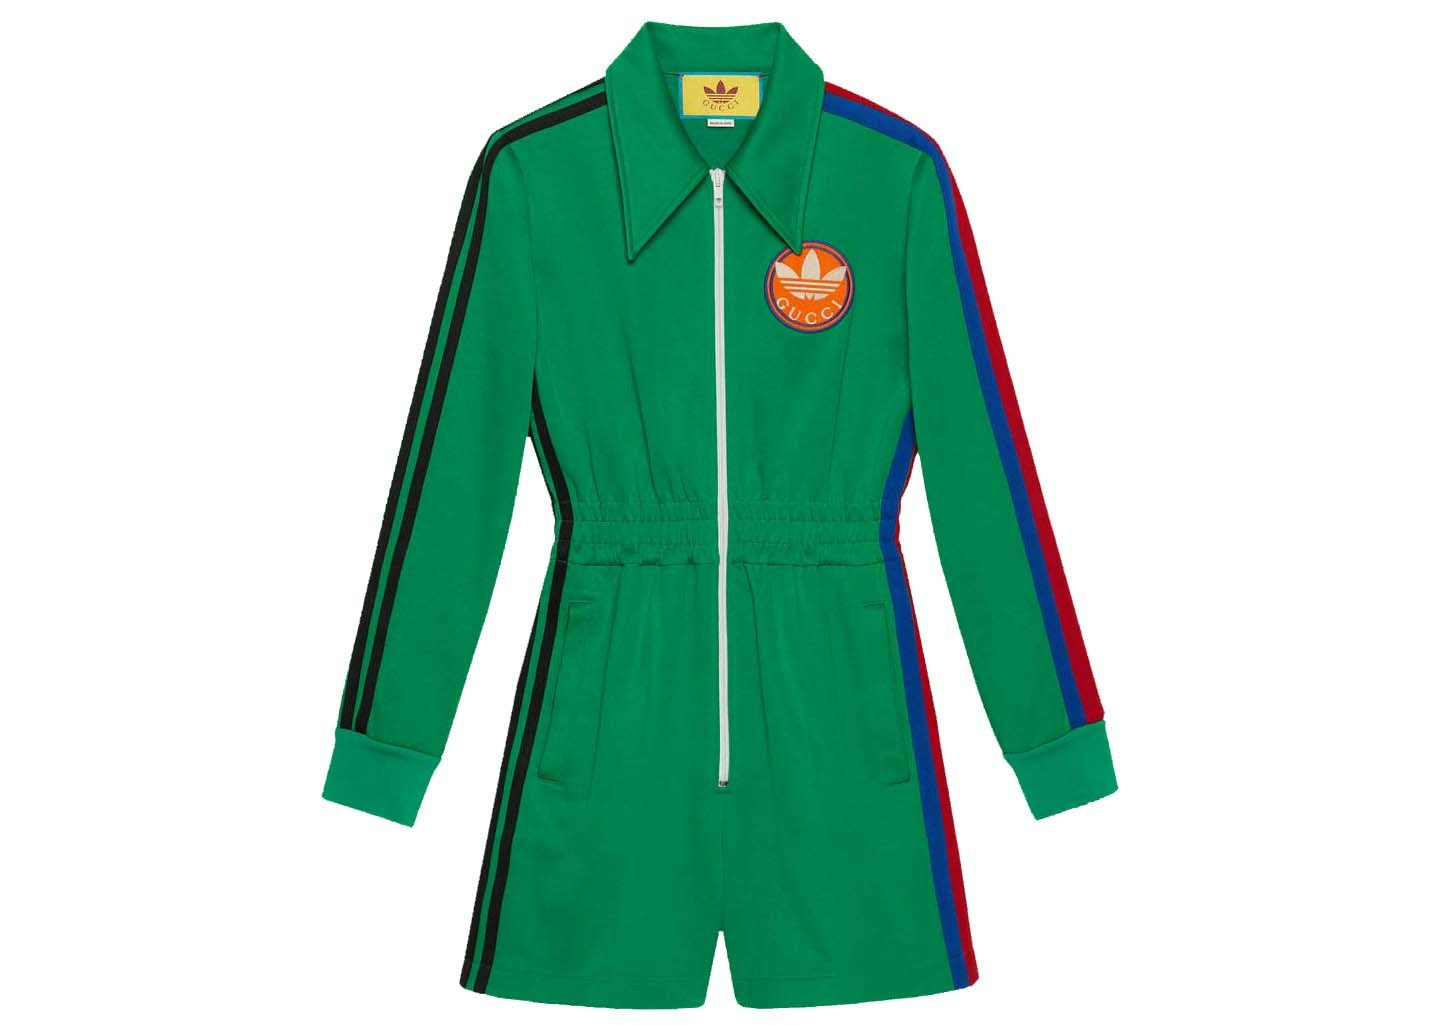 green adidas jumpsuit online sales,Up To OFF 55 % |